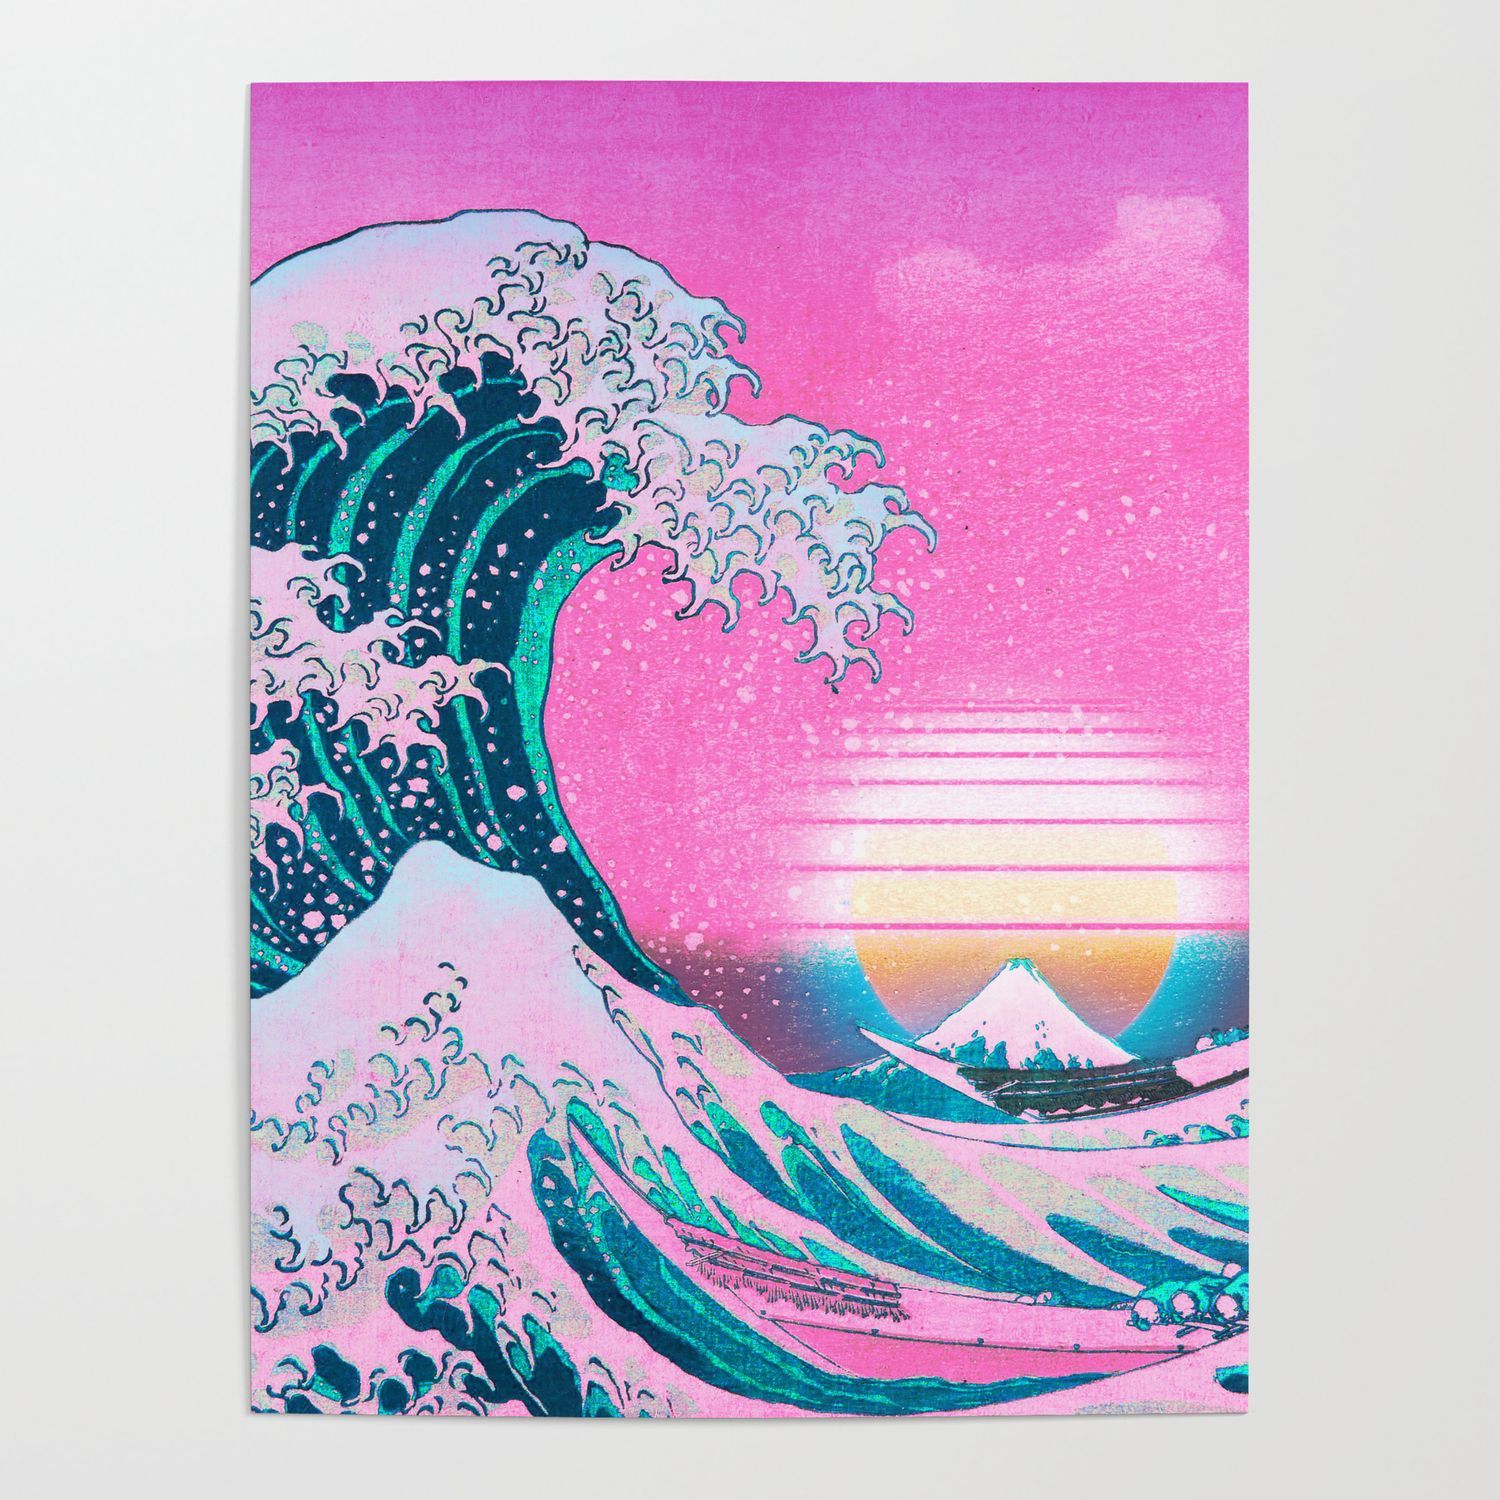 Aesthetic Vaporwave The Great Wave off Kanagawa by Hokusai in pastel pink and blue colors. Poster - Wave